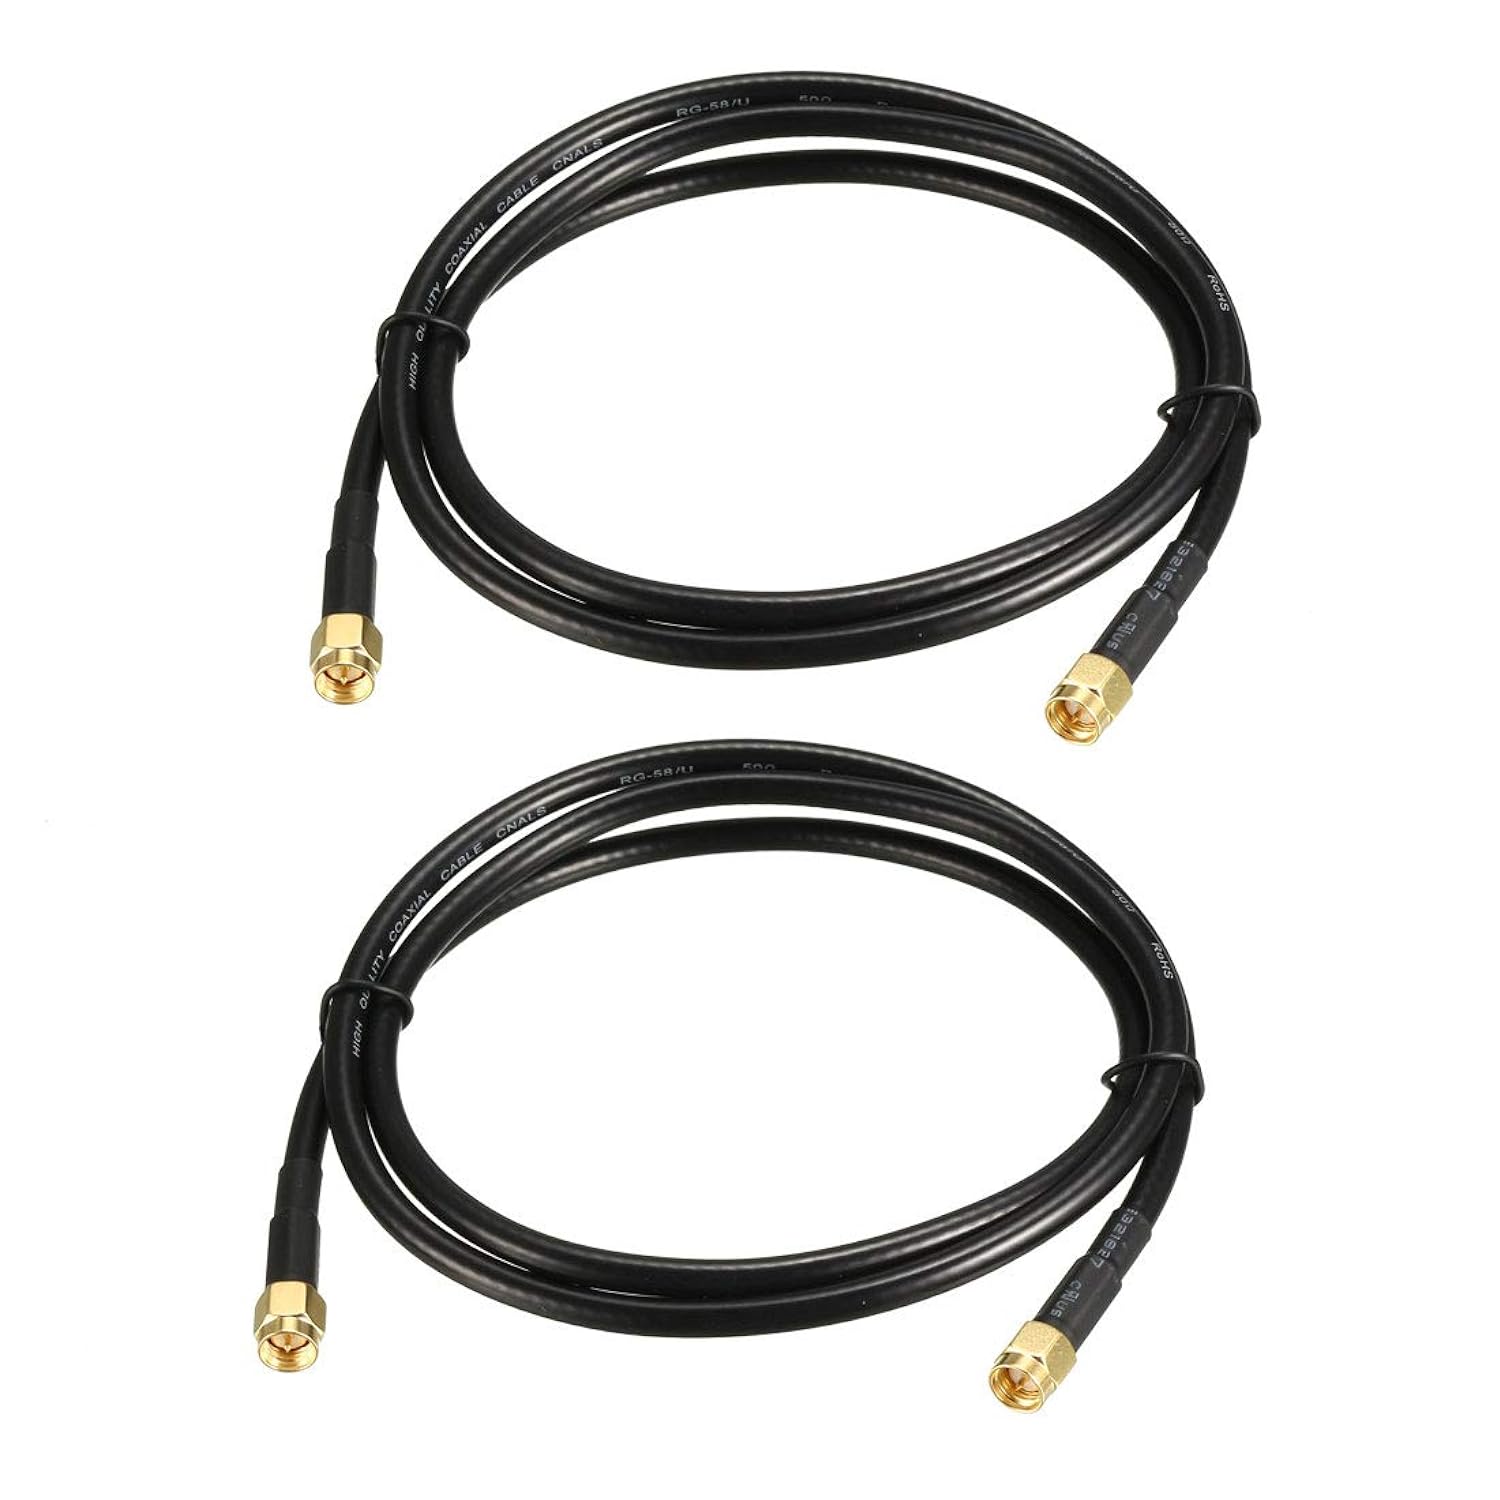 uxcell Antenna Extension Cable SMA Male to SMA Male Coaxial Cable RG58 50 Ohm 6 ft 2pcs